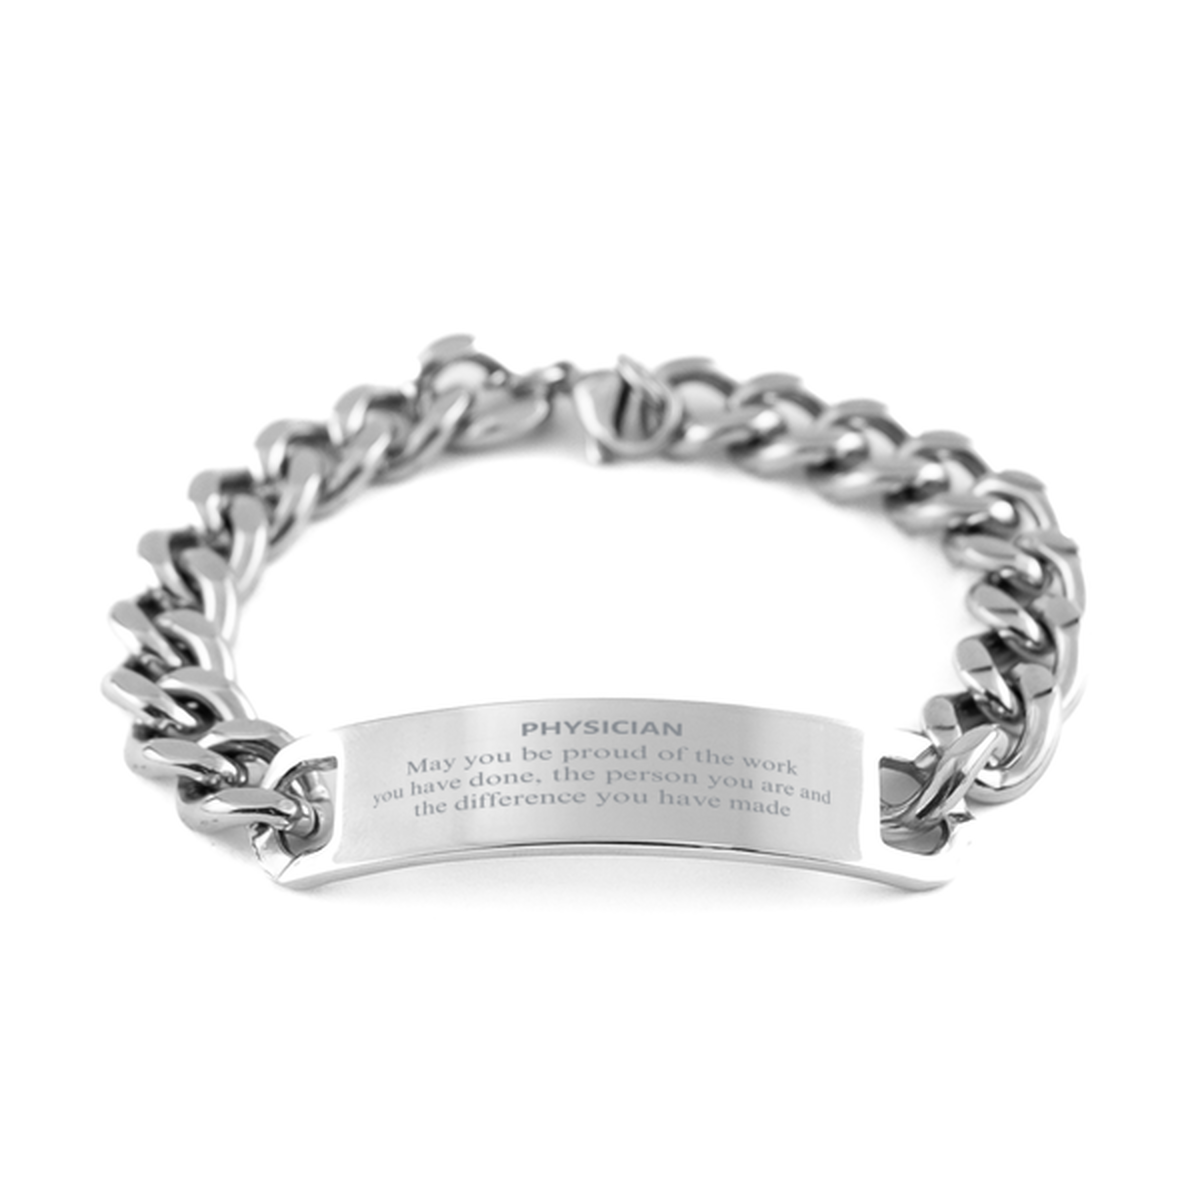 Physician May you be proud of the work you have done, Retirement Physician Cuban Chain Stainless Steel Bracelet for Colleague Appreciation Gifts Amazing for Physician